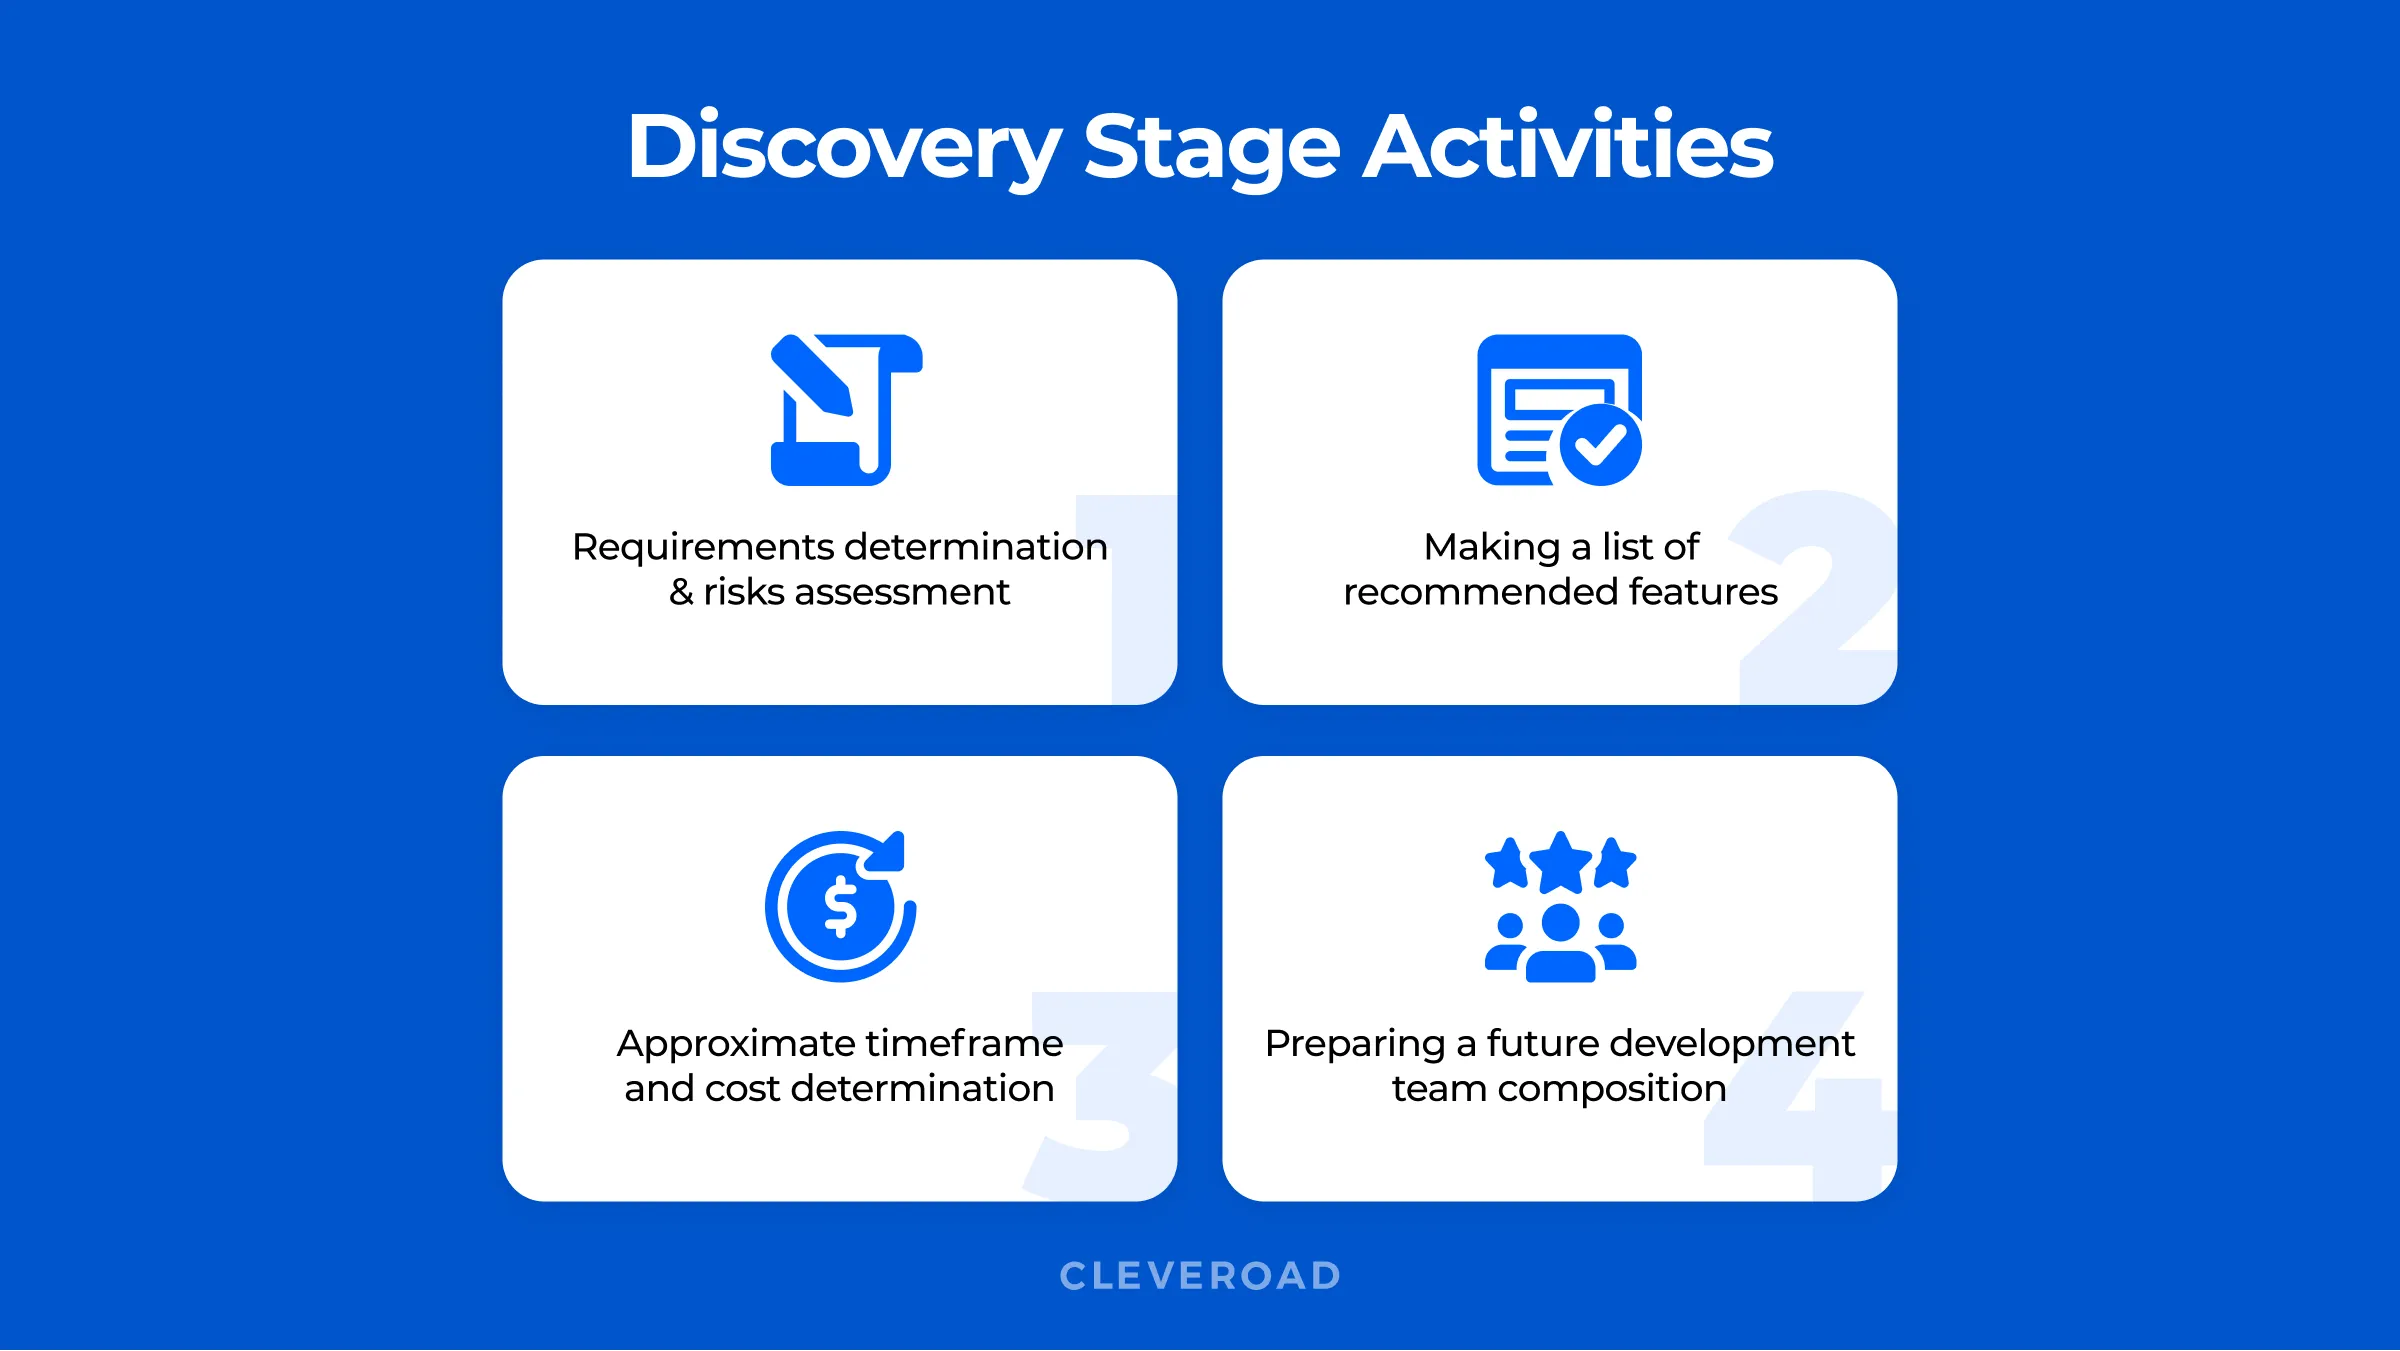 Discovery stage activities